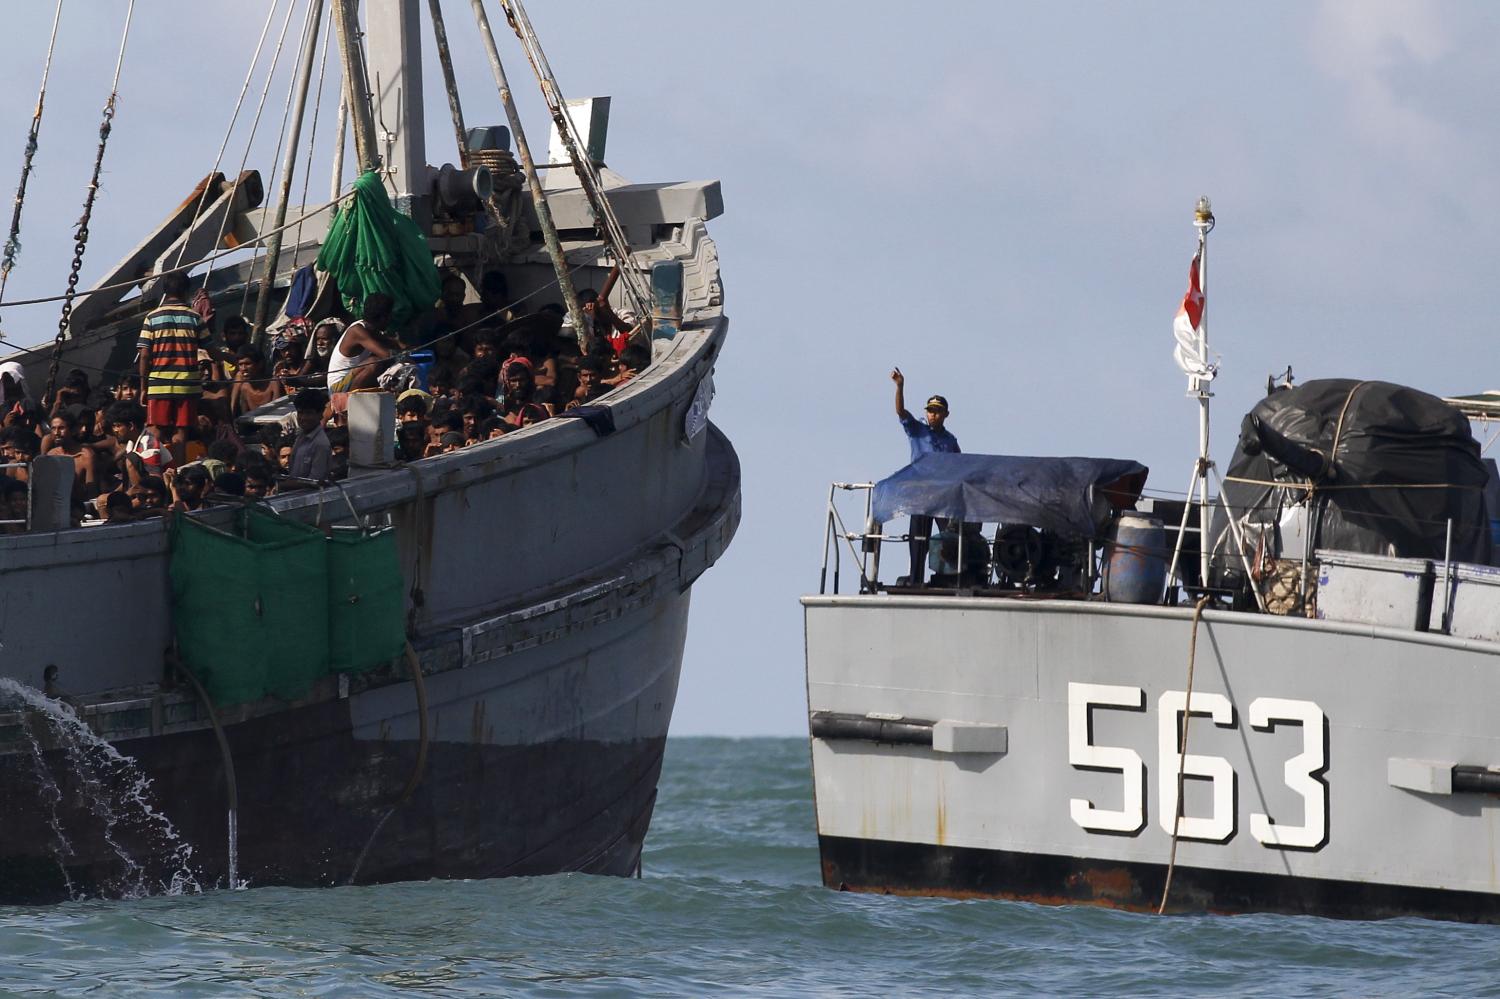 A Myanmar military officer (R) gestures from a navy ship towards a boat packed with migrants, off Leik Island in the Andaman Sea May 31, 2015. More than 700 migrants found packed aboard an overcrowded boat in the Andaman Sea were still being held offshore by Myanmar's navy on Monday, more than three days after the converted fishing vessel was intercepted off the country's coast. Picture taken May 31, 2015. REUTERS/Soe Zeya Tun - RTR4YF8E